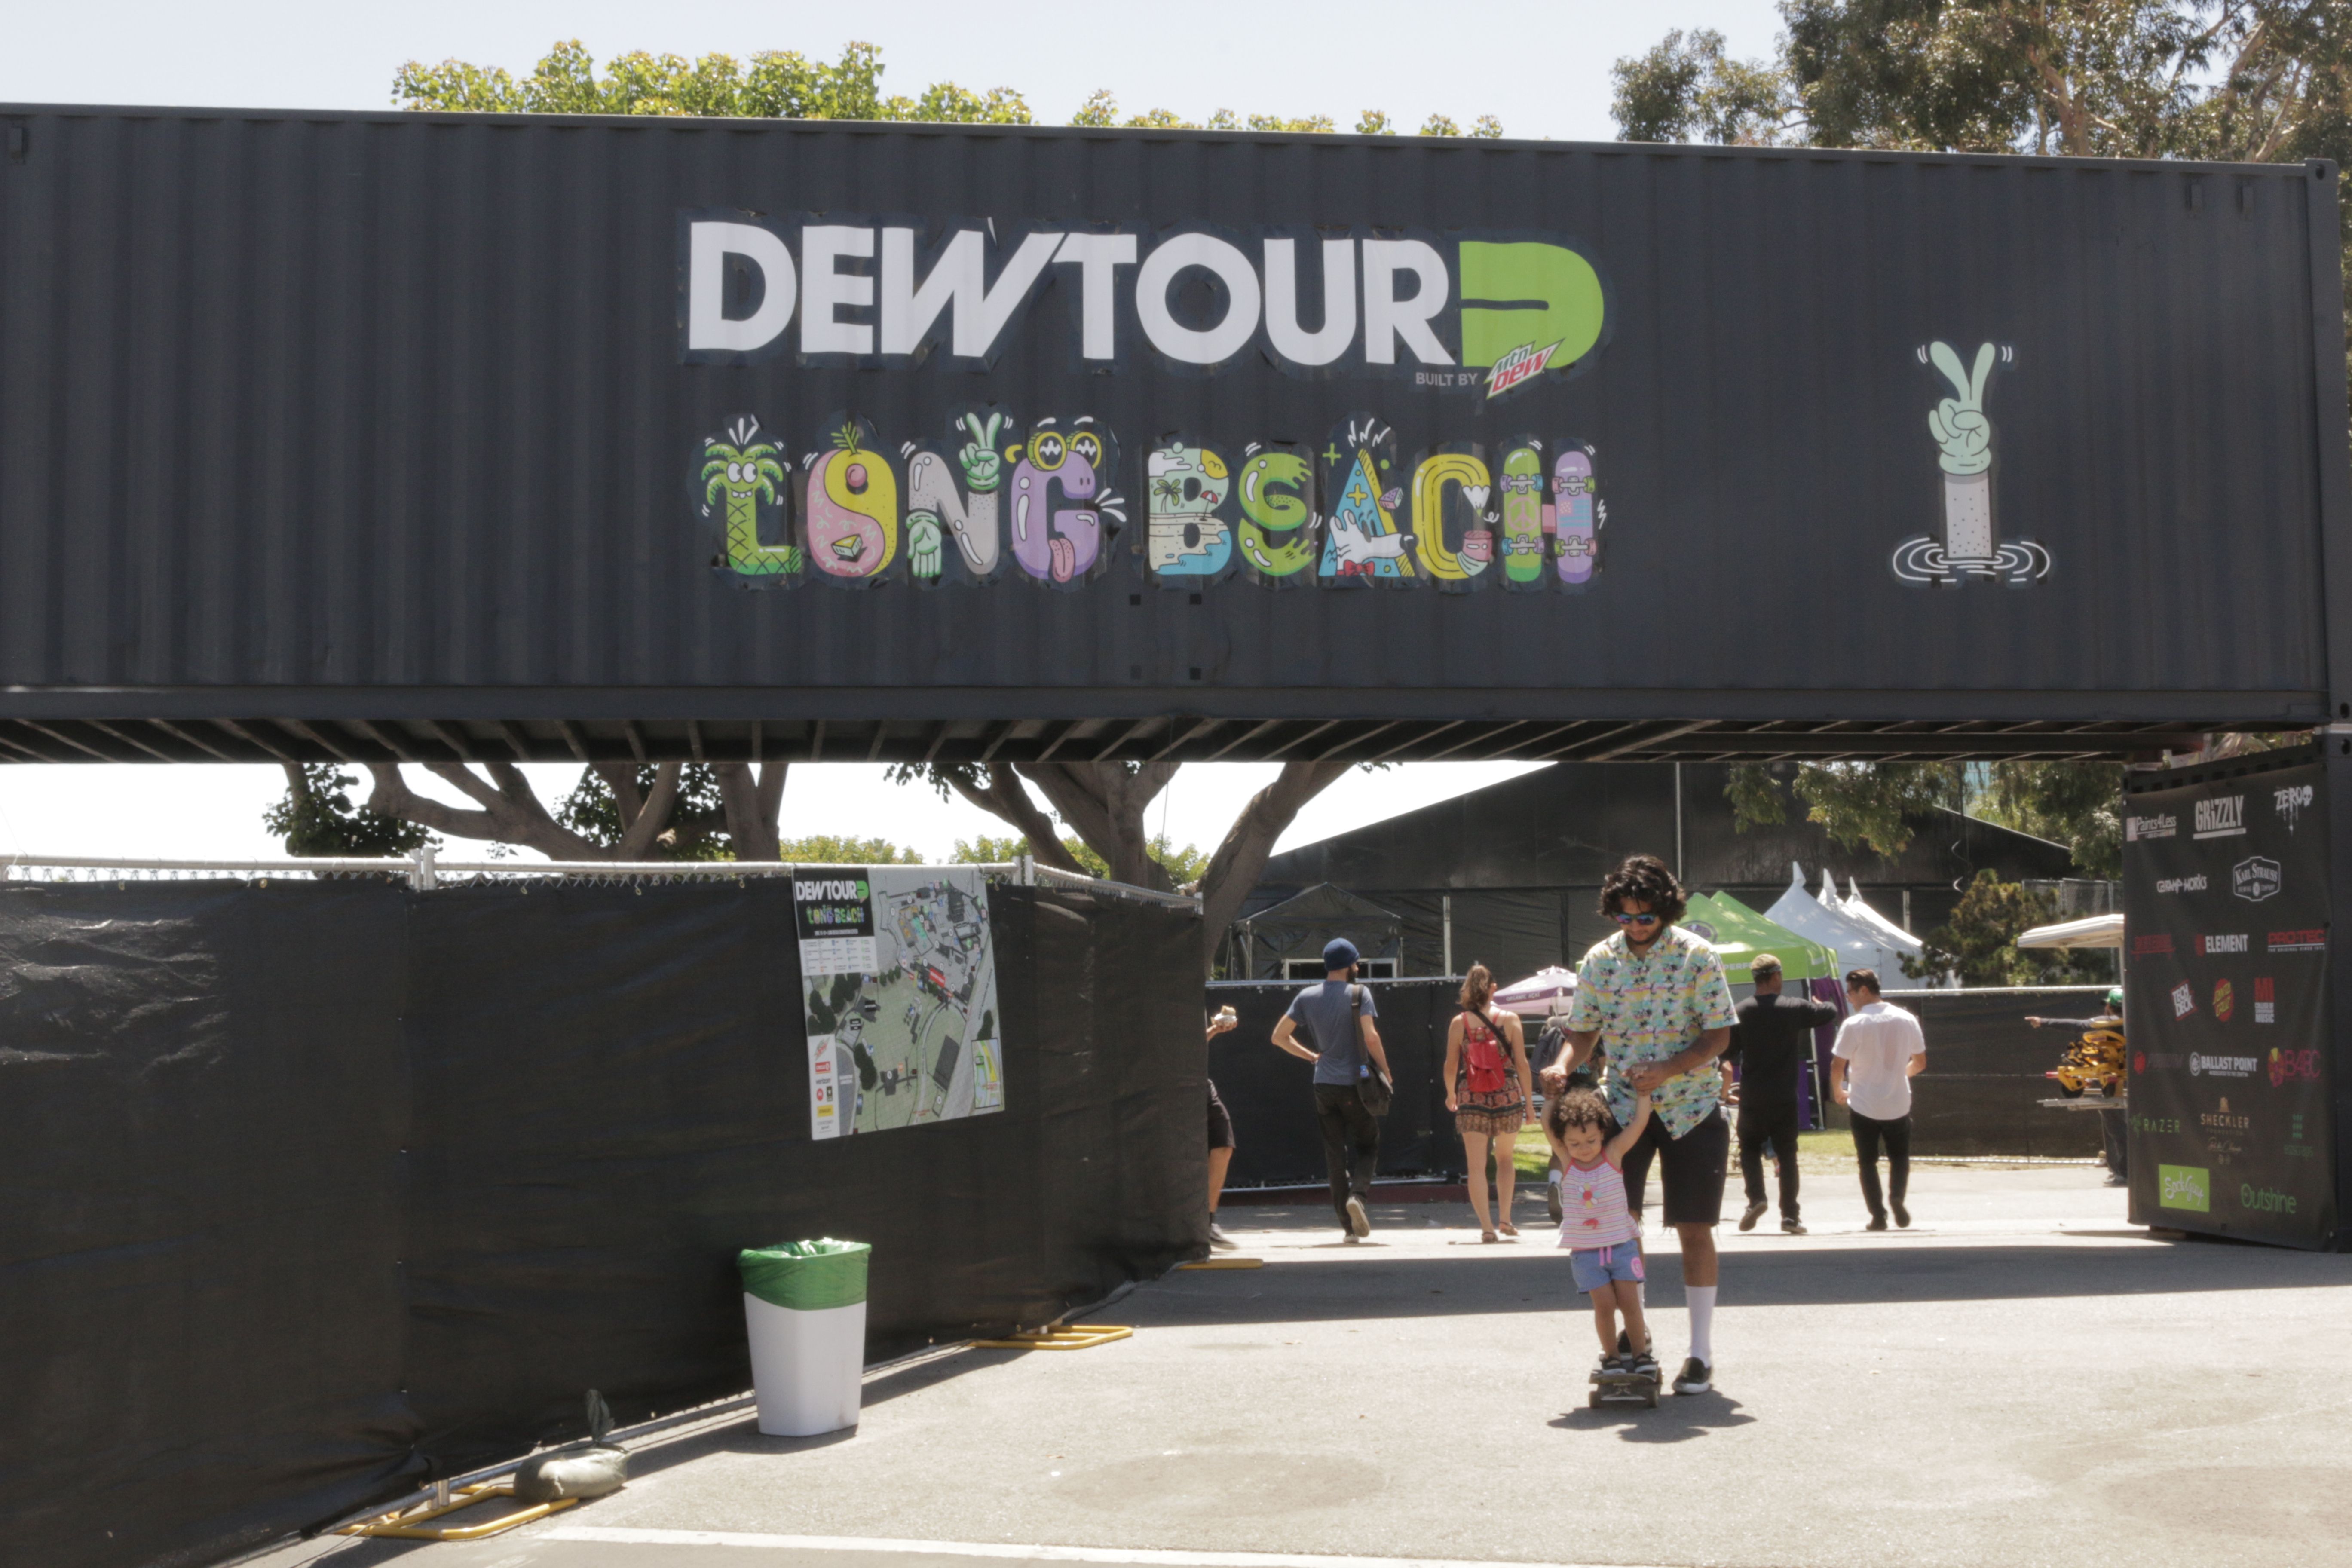 What to Expect from This Year’s Dew Tour: Skating and Modern Art Perfectly Blended